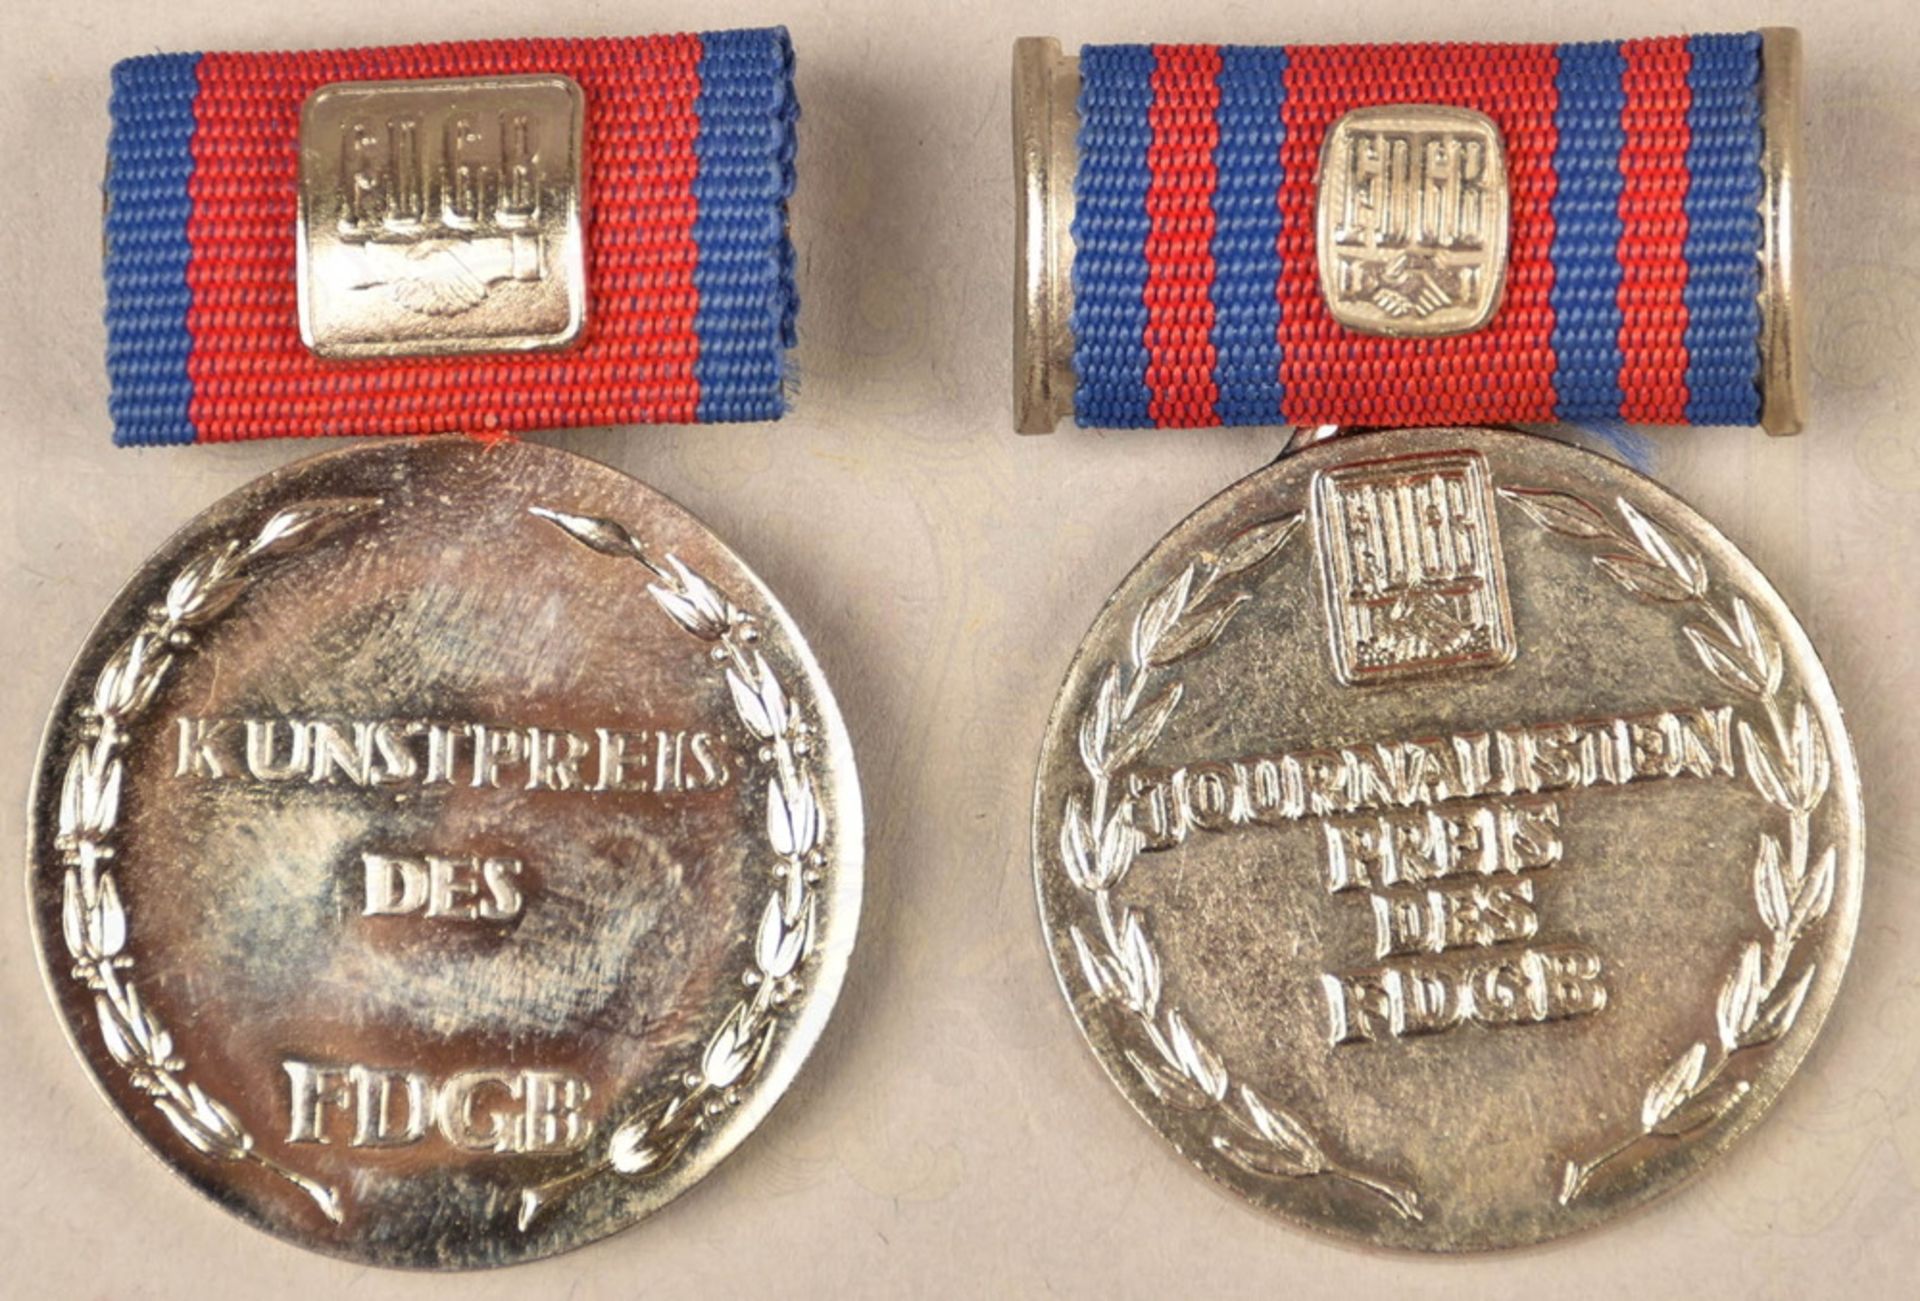 2 GDR awards of the East German FDGB trade union